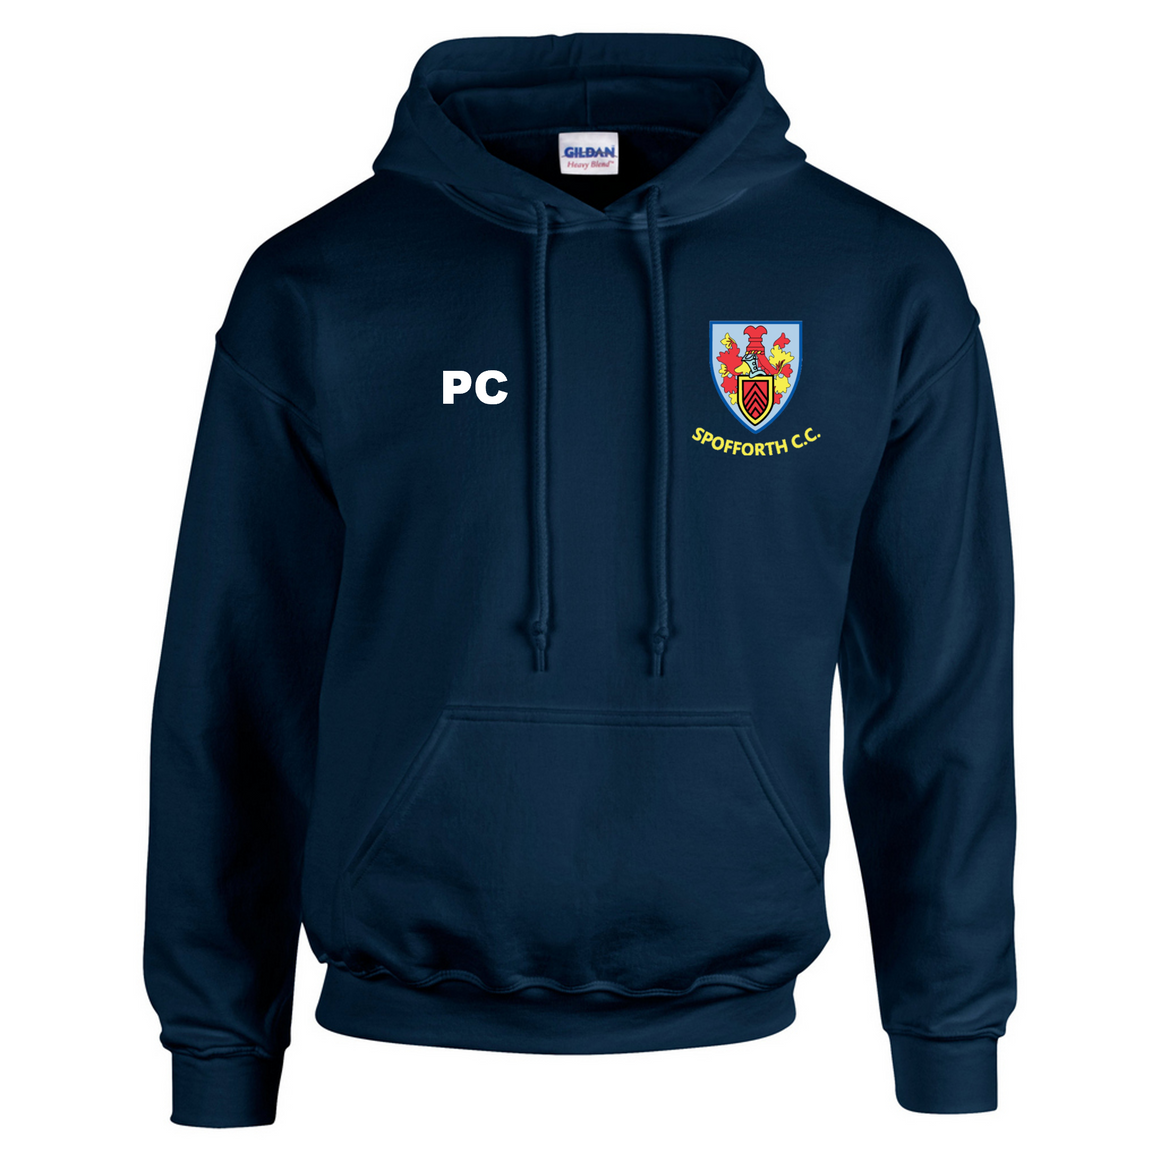 Spofforth C.C. Hooded Top